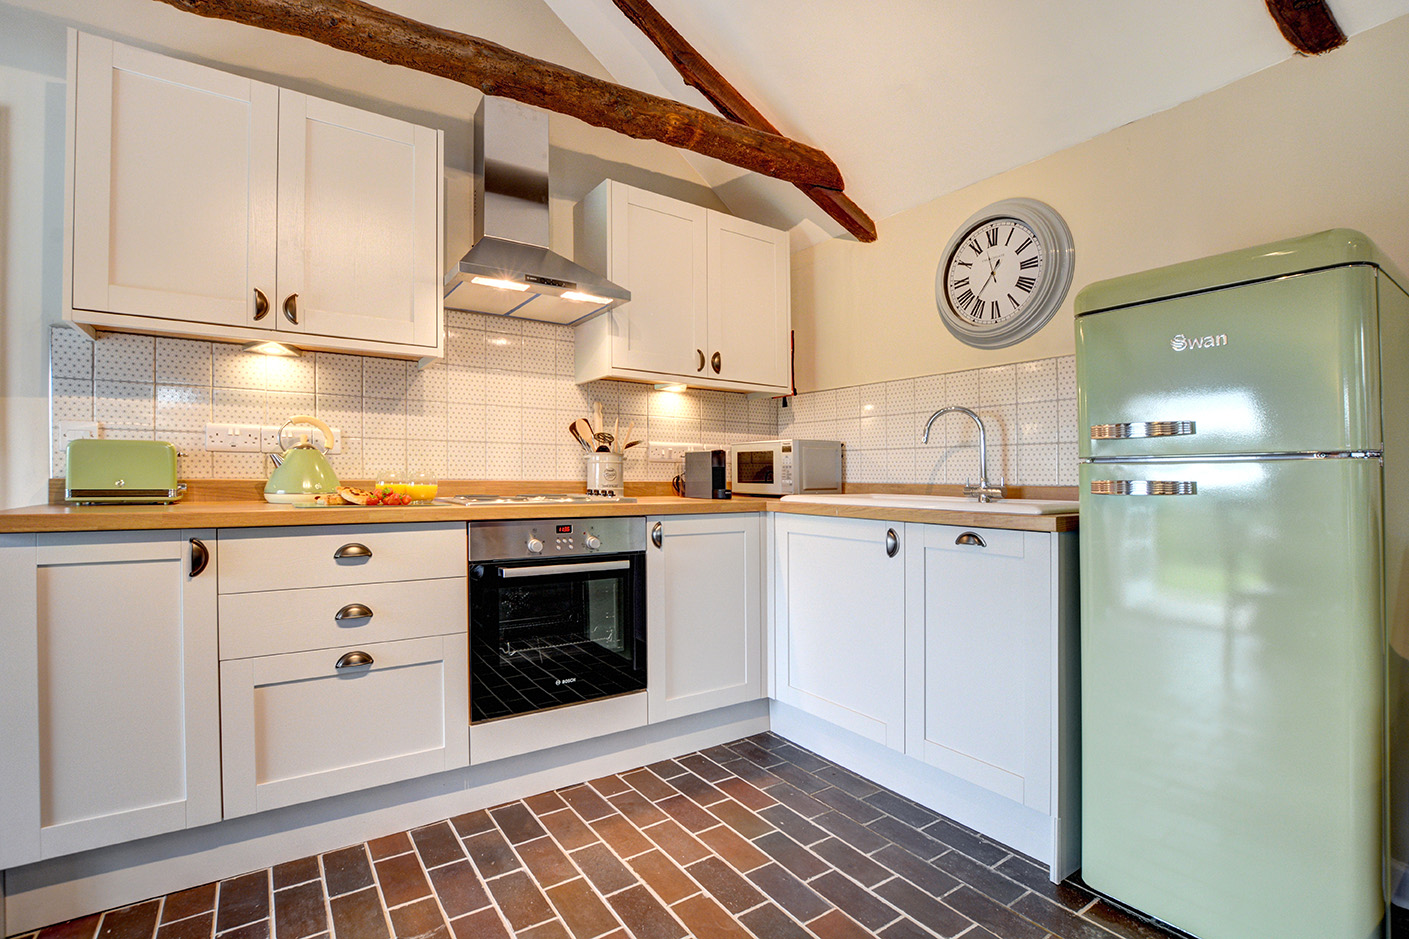 The kitchen area of The Linney self catering cottage converted barn at Penrose Burden holiday cottages in Cornwall.jpg